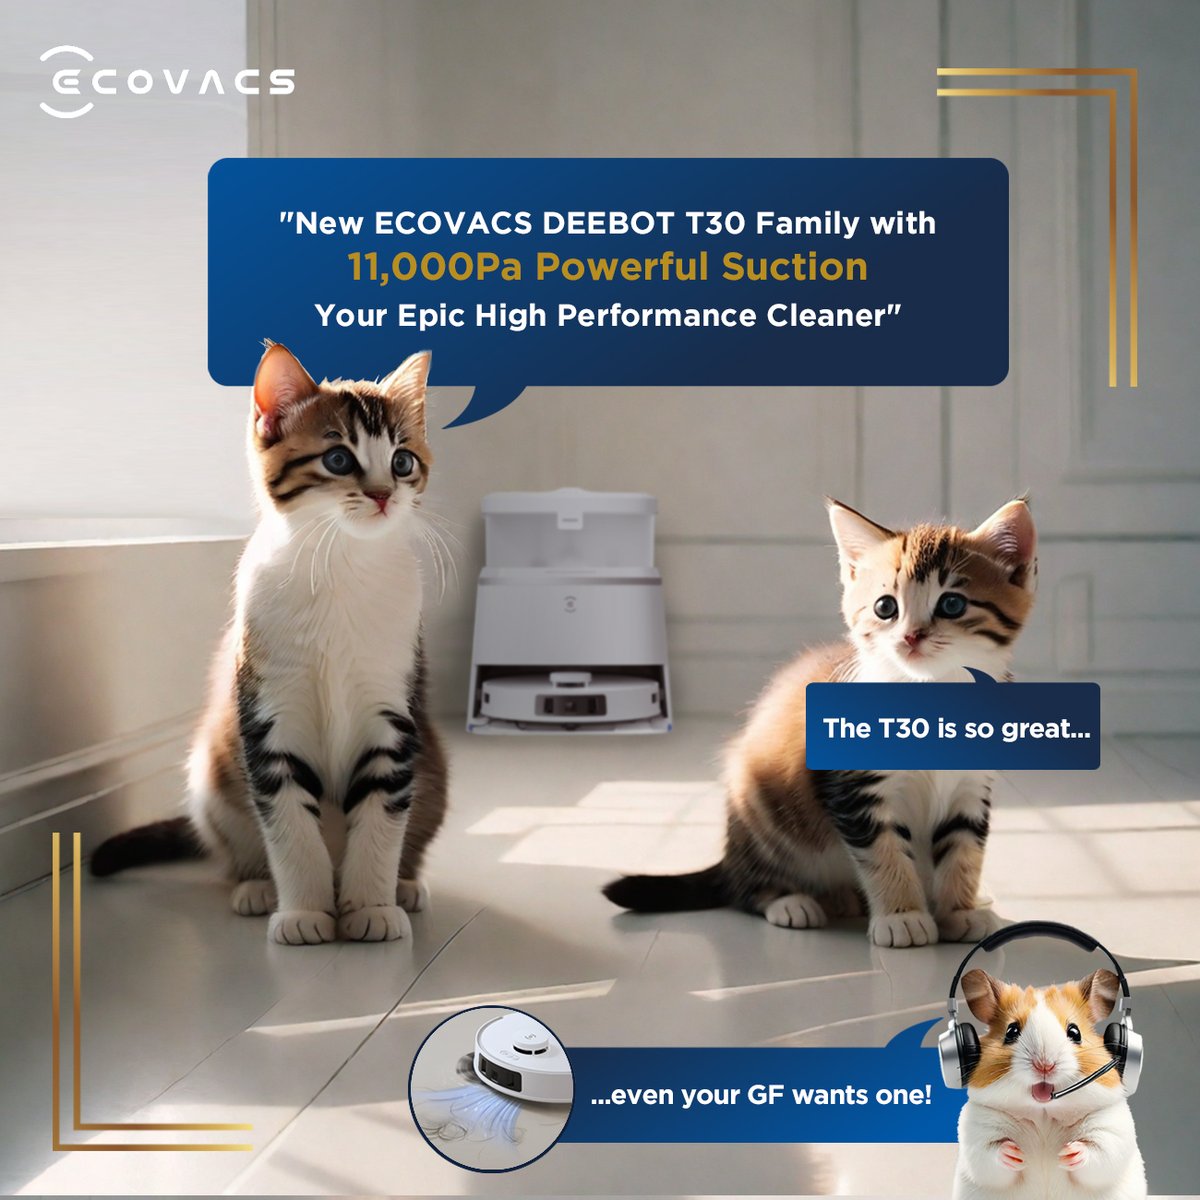 Suck it up, making cleanups a pup. With DEEBOT T30 Family's 11,000Pa Powerful Suction, even the sneakiest pet fur doesn’t stand a chance. 💨🐱 #DEEBOTT30 #PetsofECOVACS #PawsomeDEEBOT